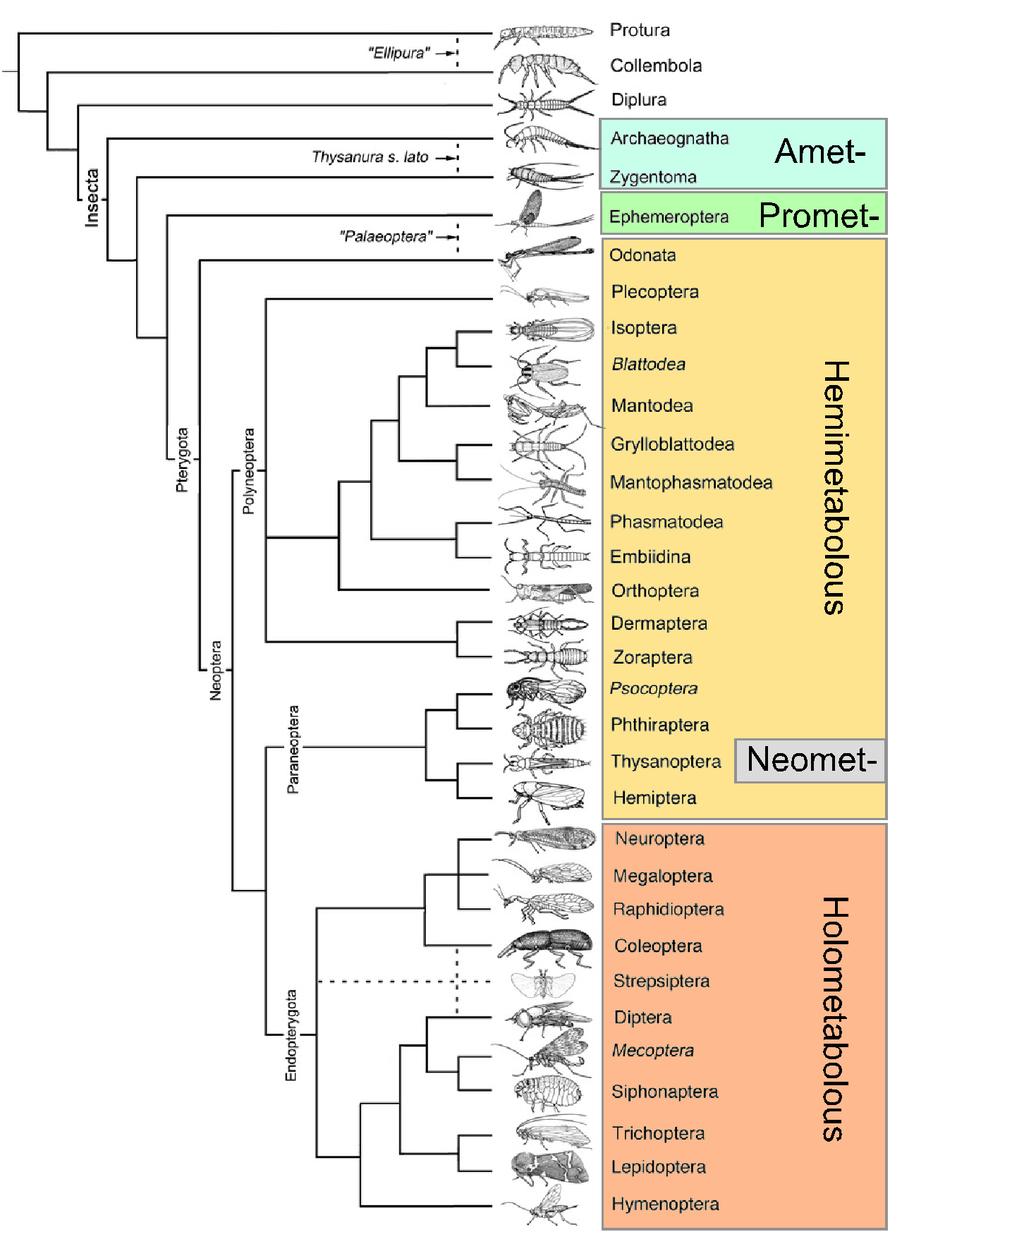 Evolution The intervening step, alate ametaboly, is not present in modern insects Neometaboly appears to be a specialisation of one particular group, derived from hemimetabolic development Evolution